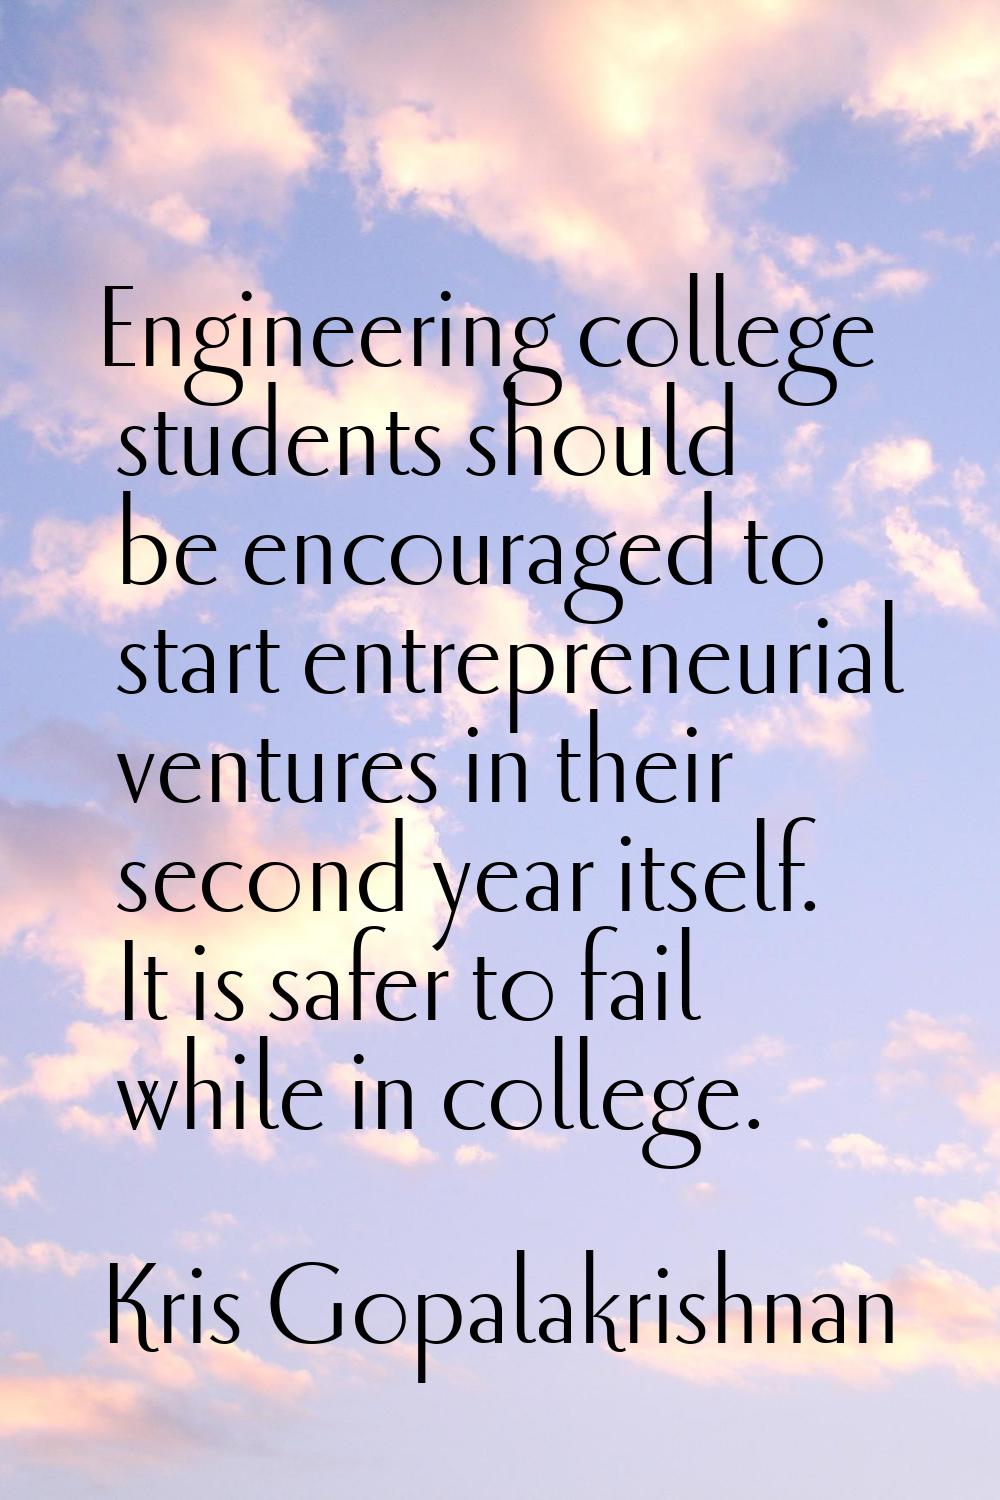 Engineering college students should be encouraged to start entrepreneurial ventures in their second